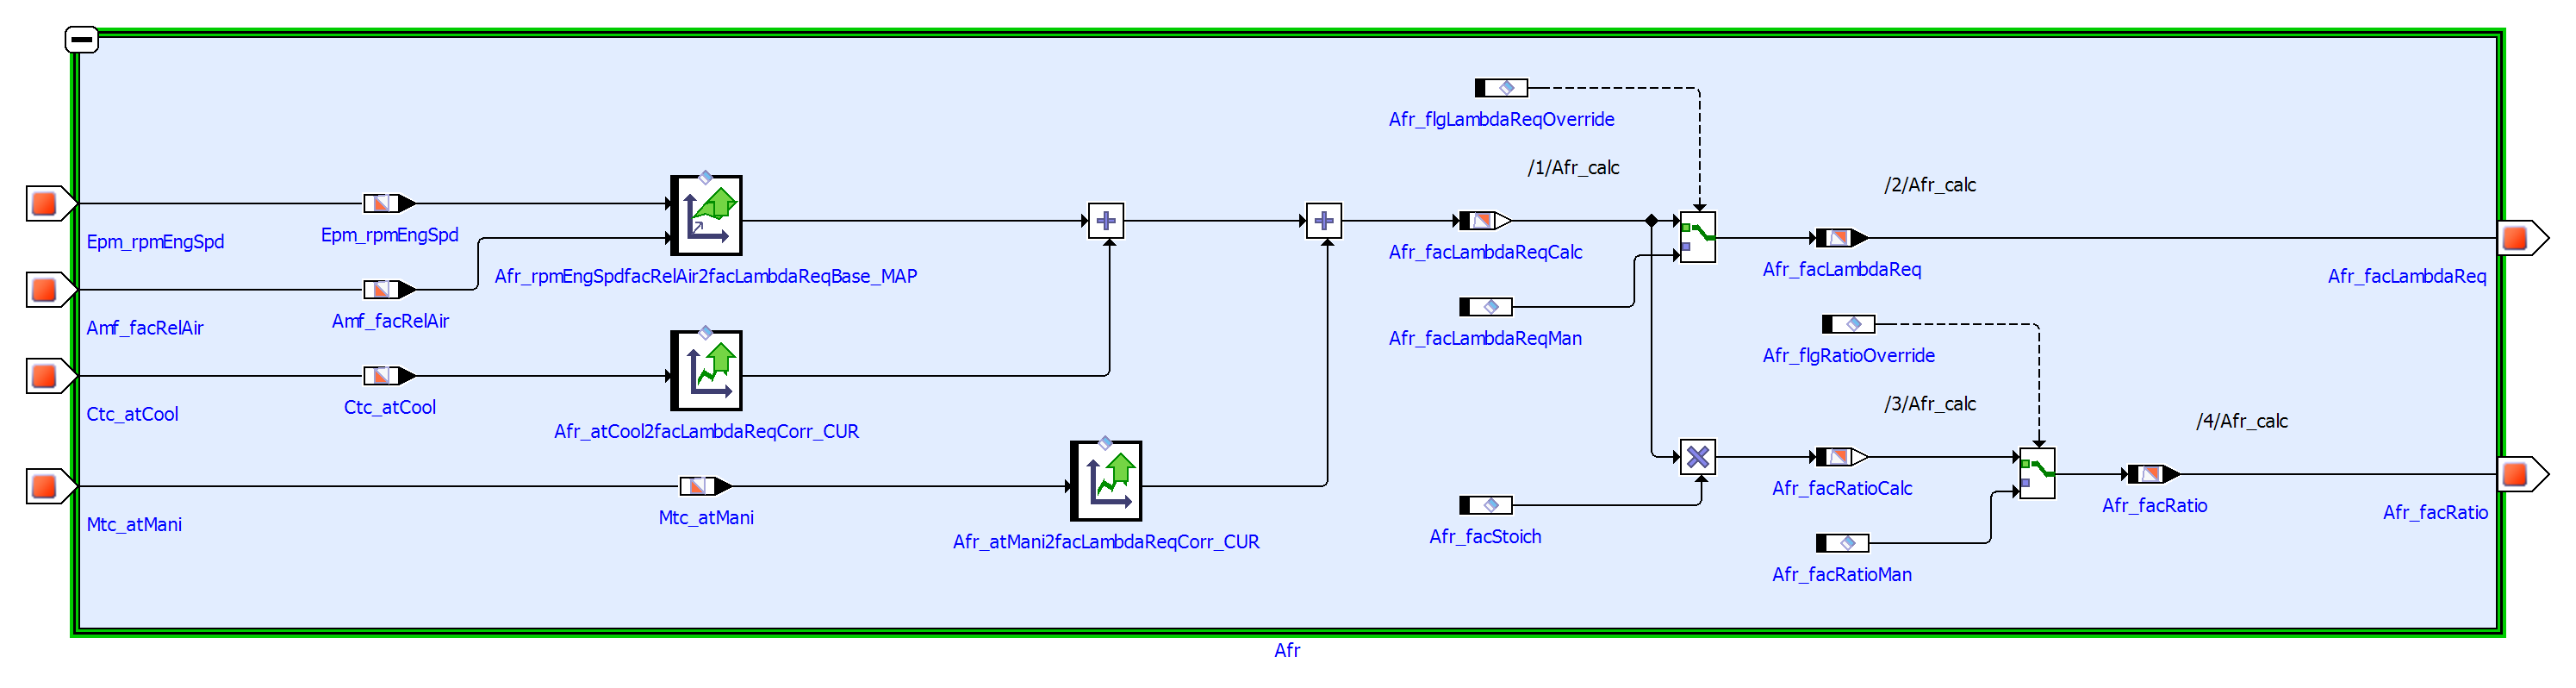 Algorithm Specification in the form of an Simulink model